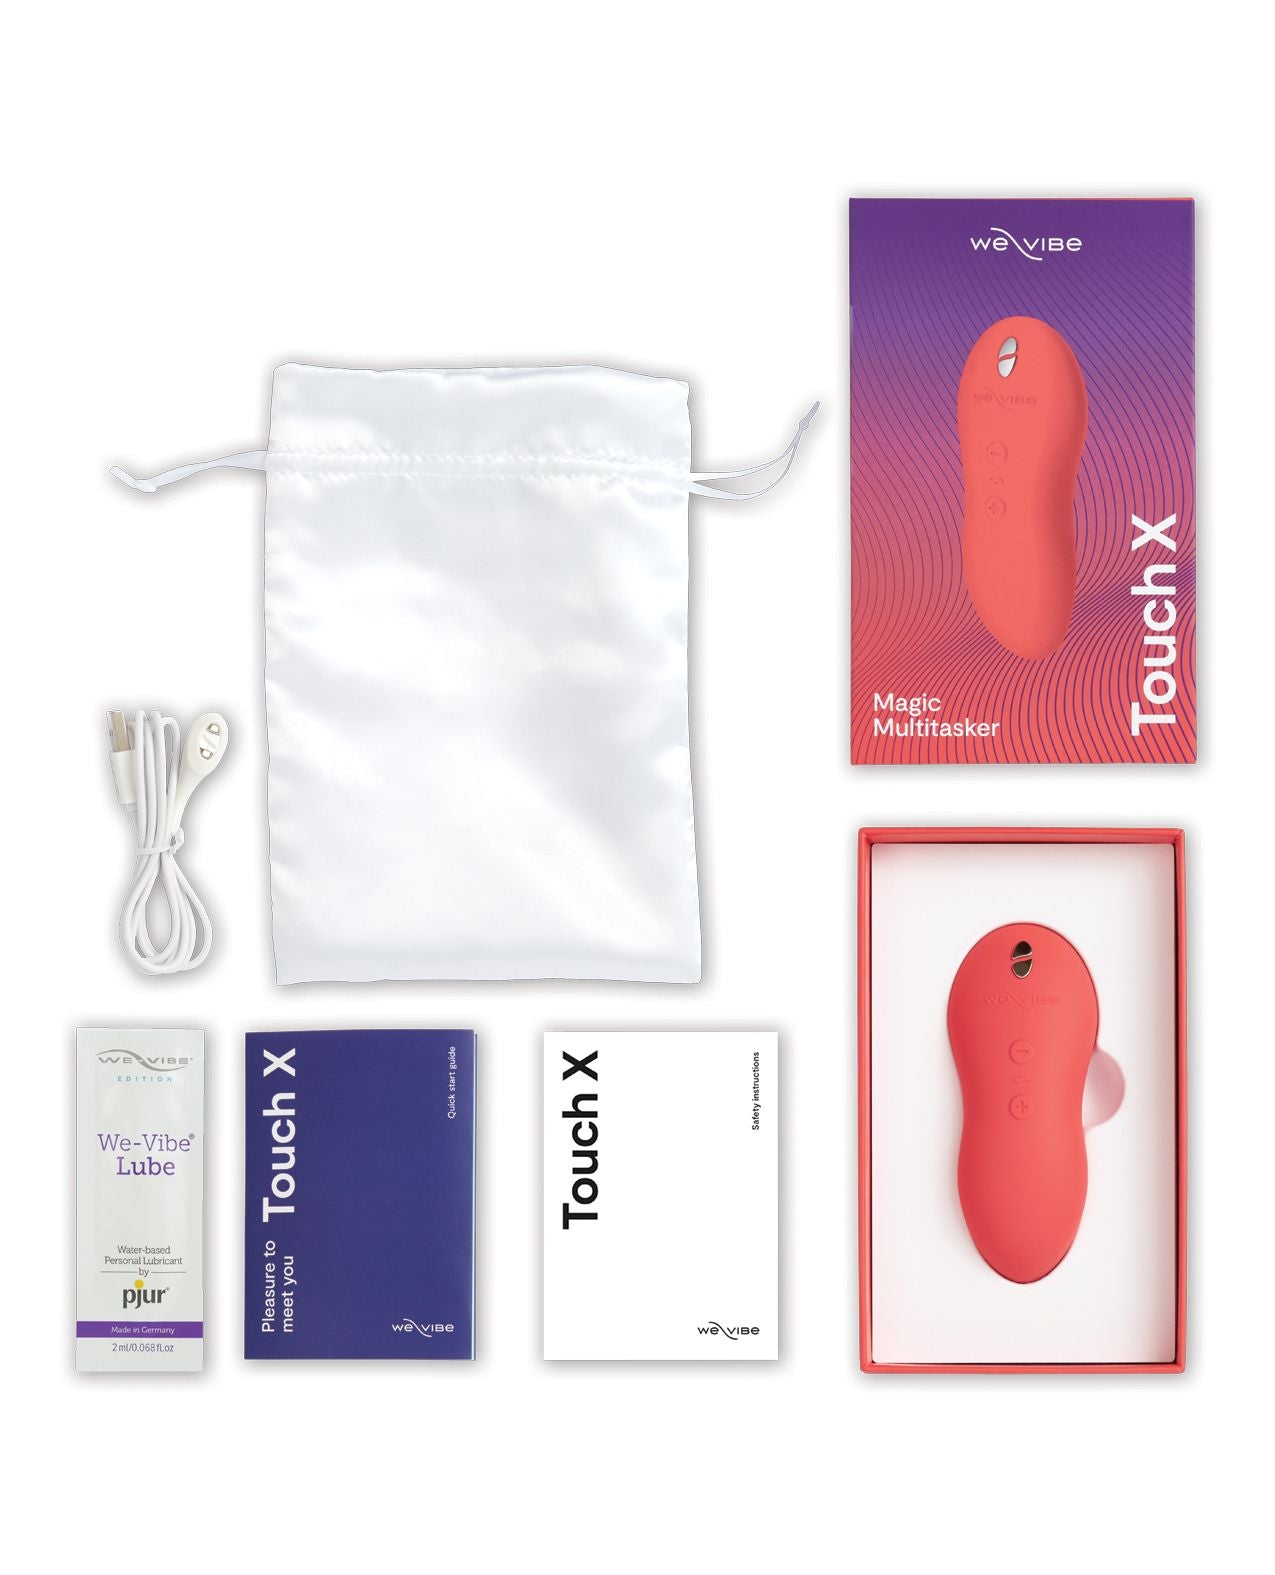 Image of what comes with the Touch X: satin storage bag, instruction manual, magnetic USB charging cord, pjur lube sample, and the toy (coral).